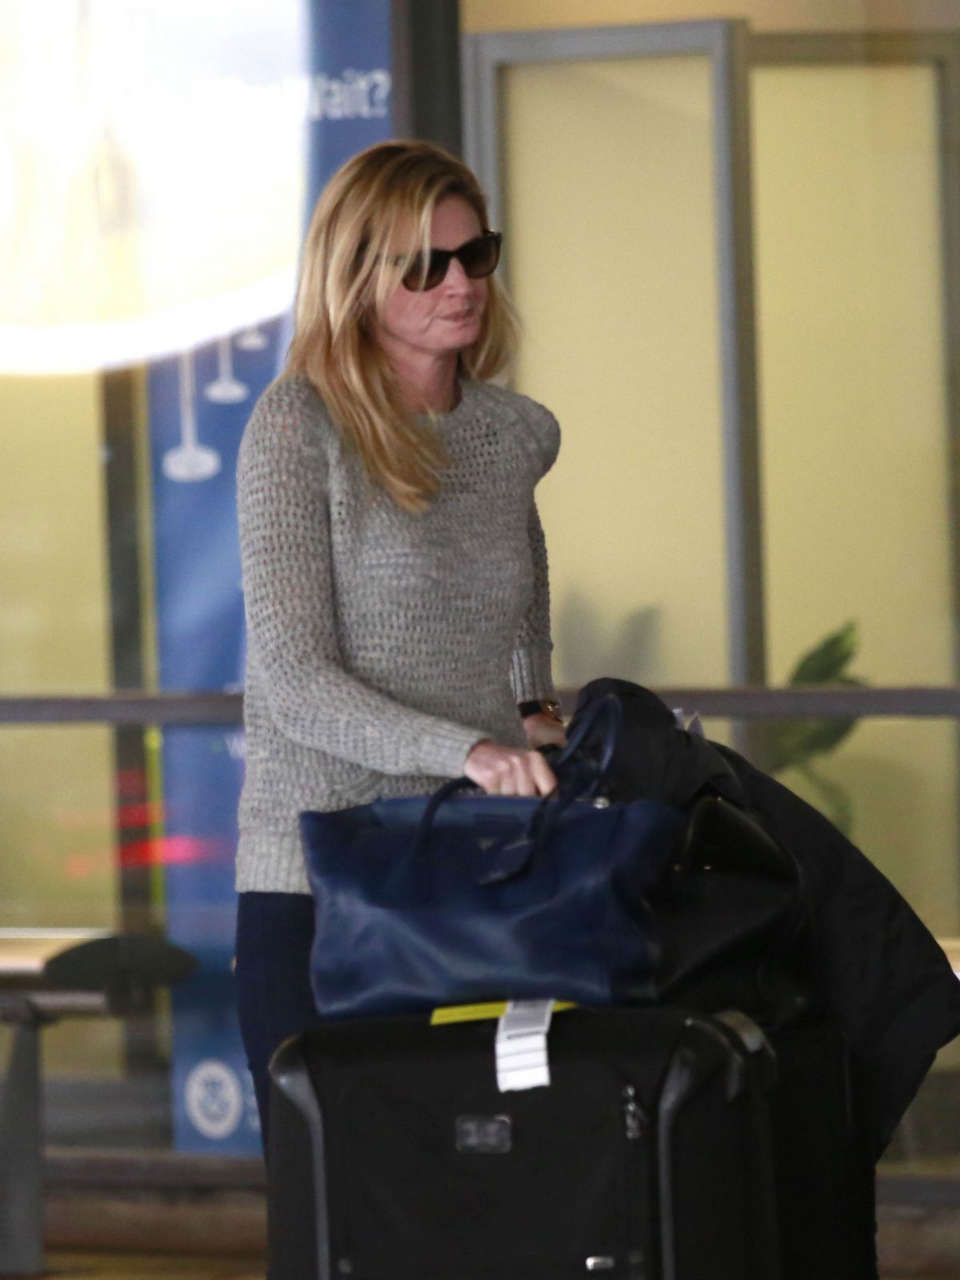 Erin Andrews Out About Los Angeles